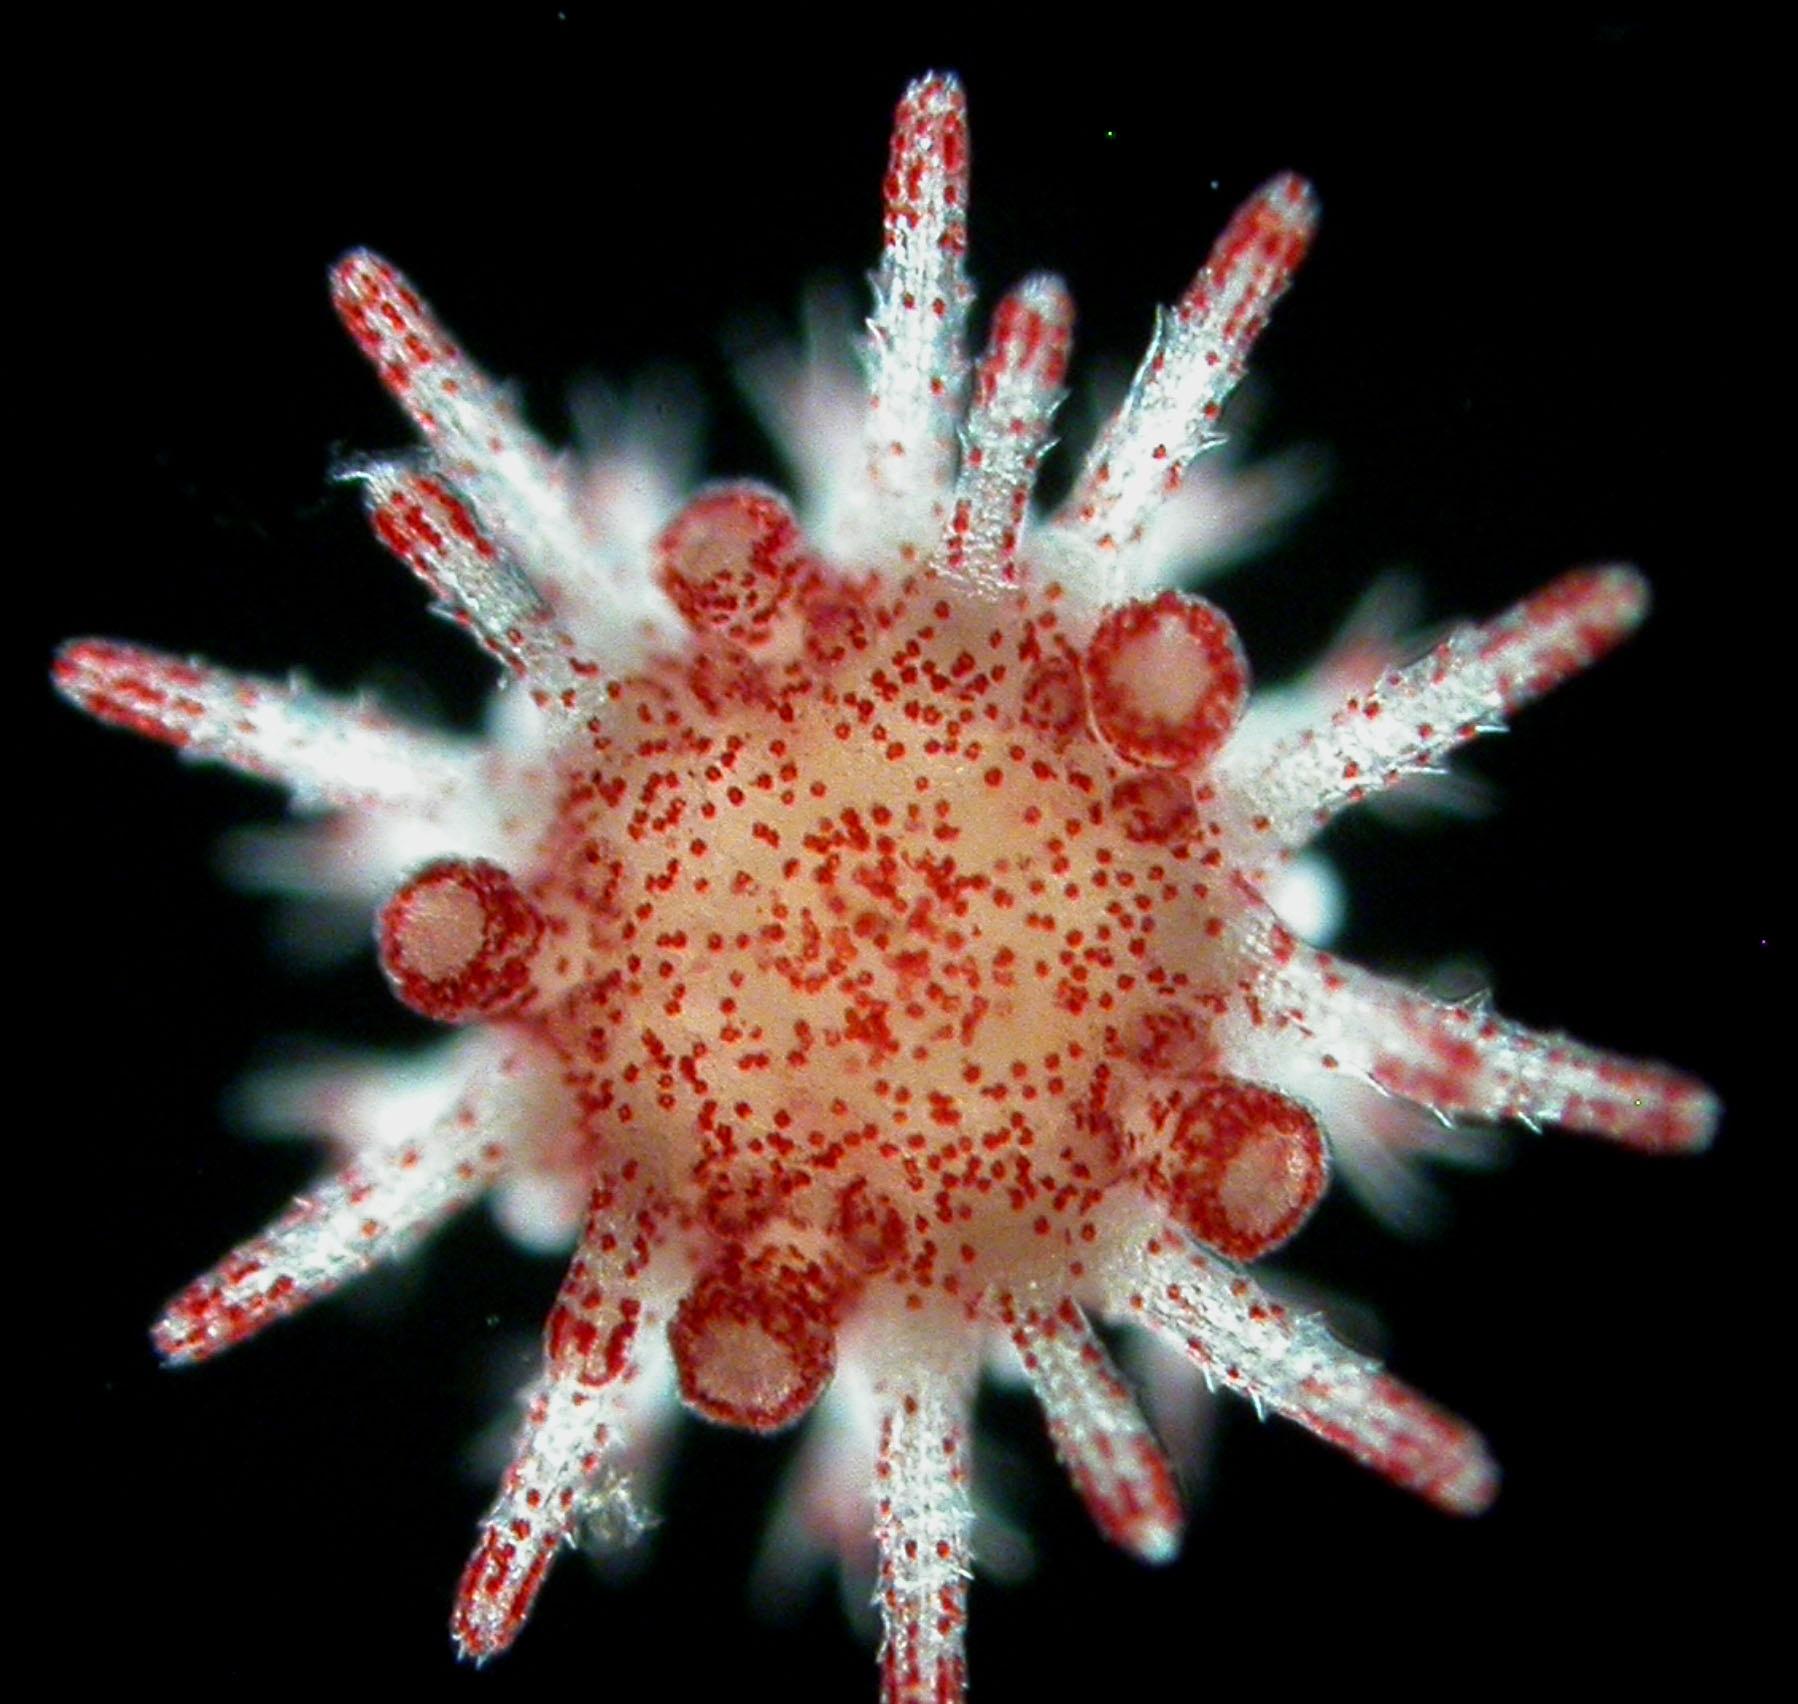 Heliocidaris juvenile under microscope. The ability of urchin parents to pass on benefits to their offspring after exposure to heatwaves is key to helping prepare and protect the next generation.